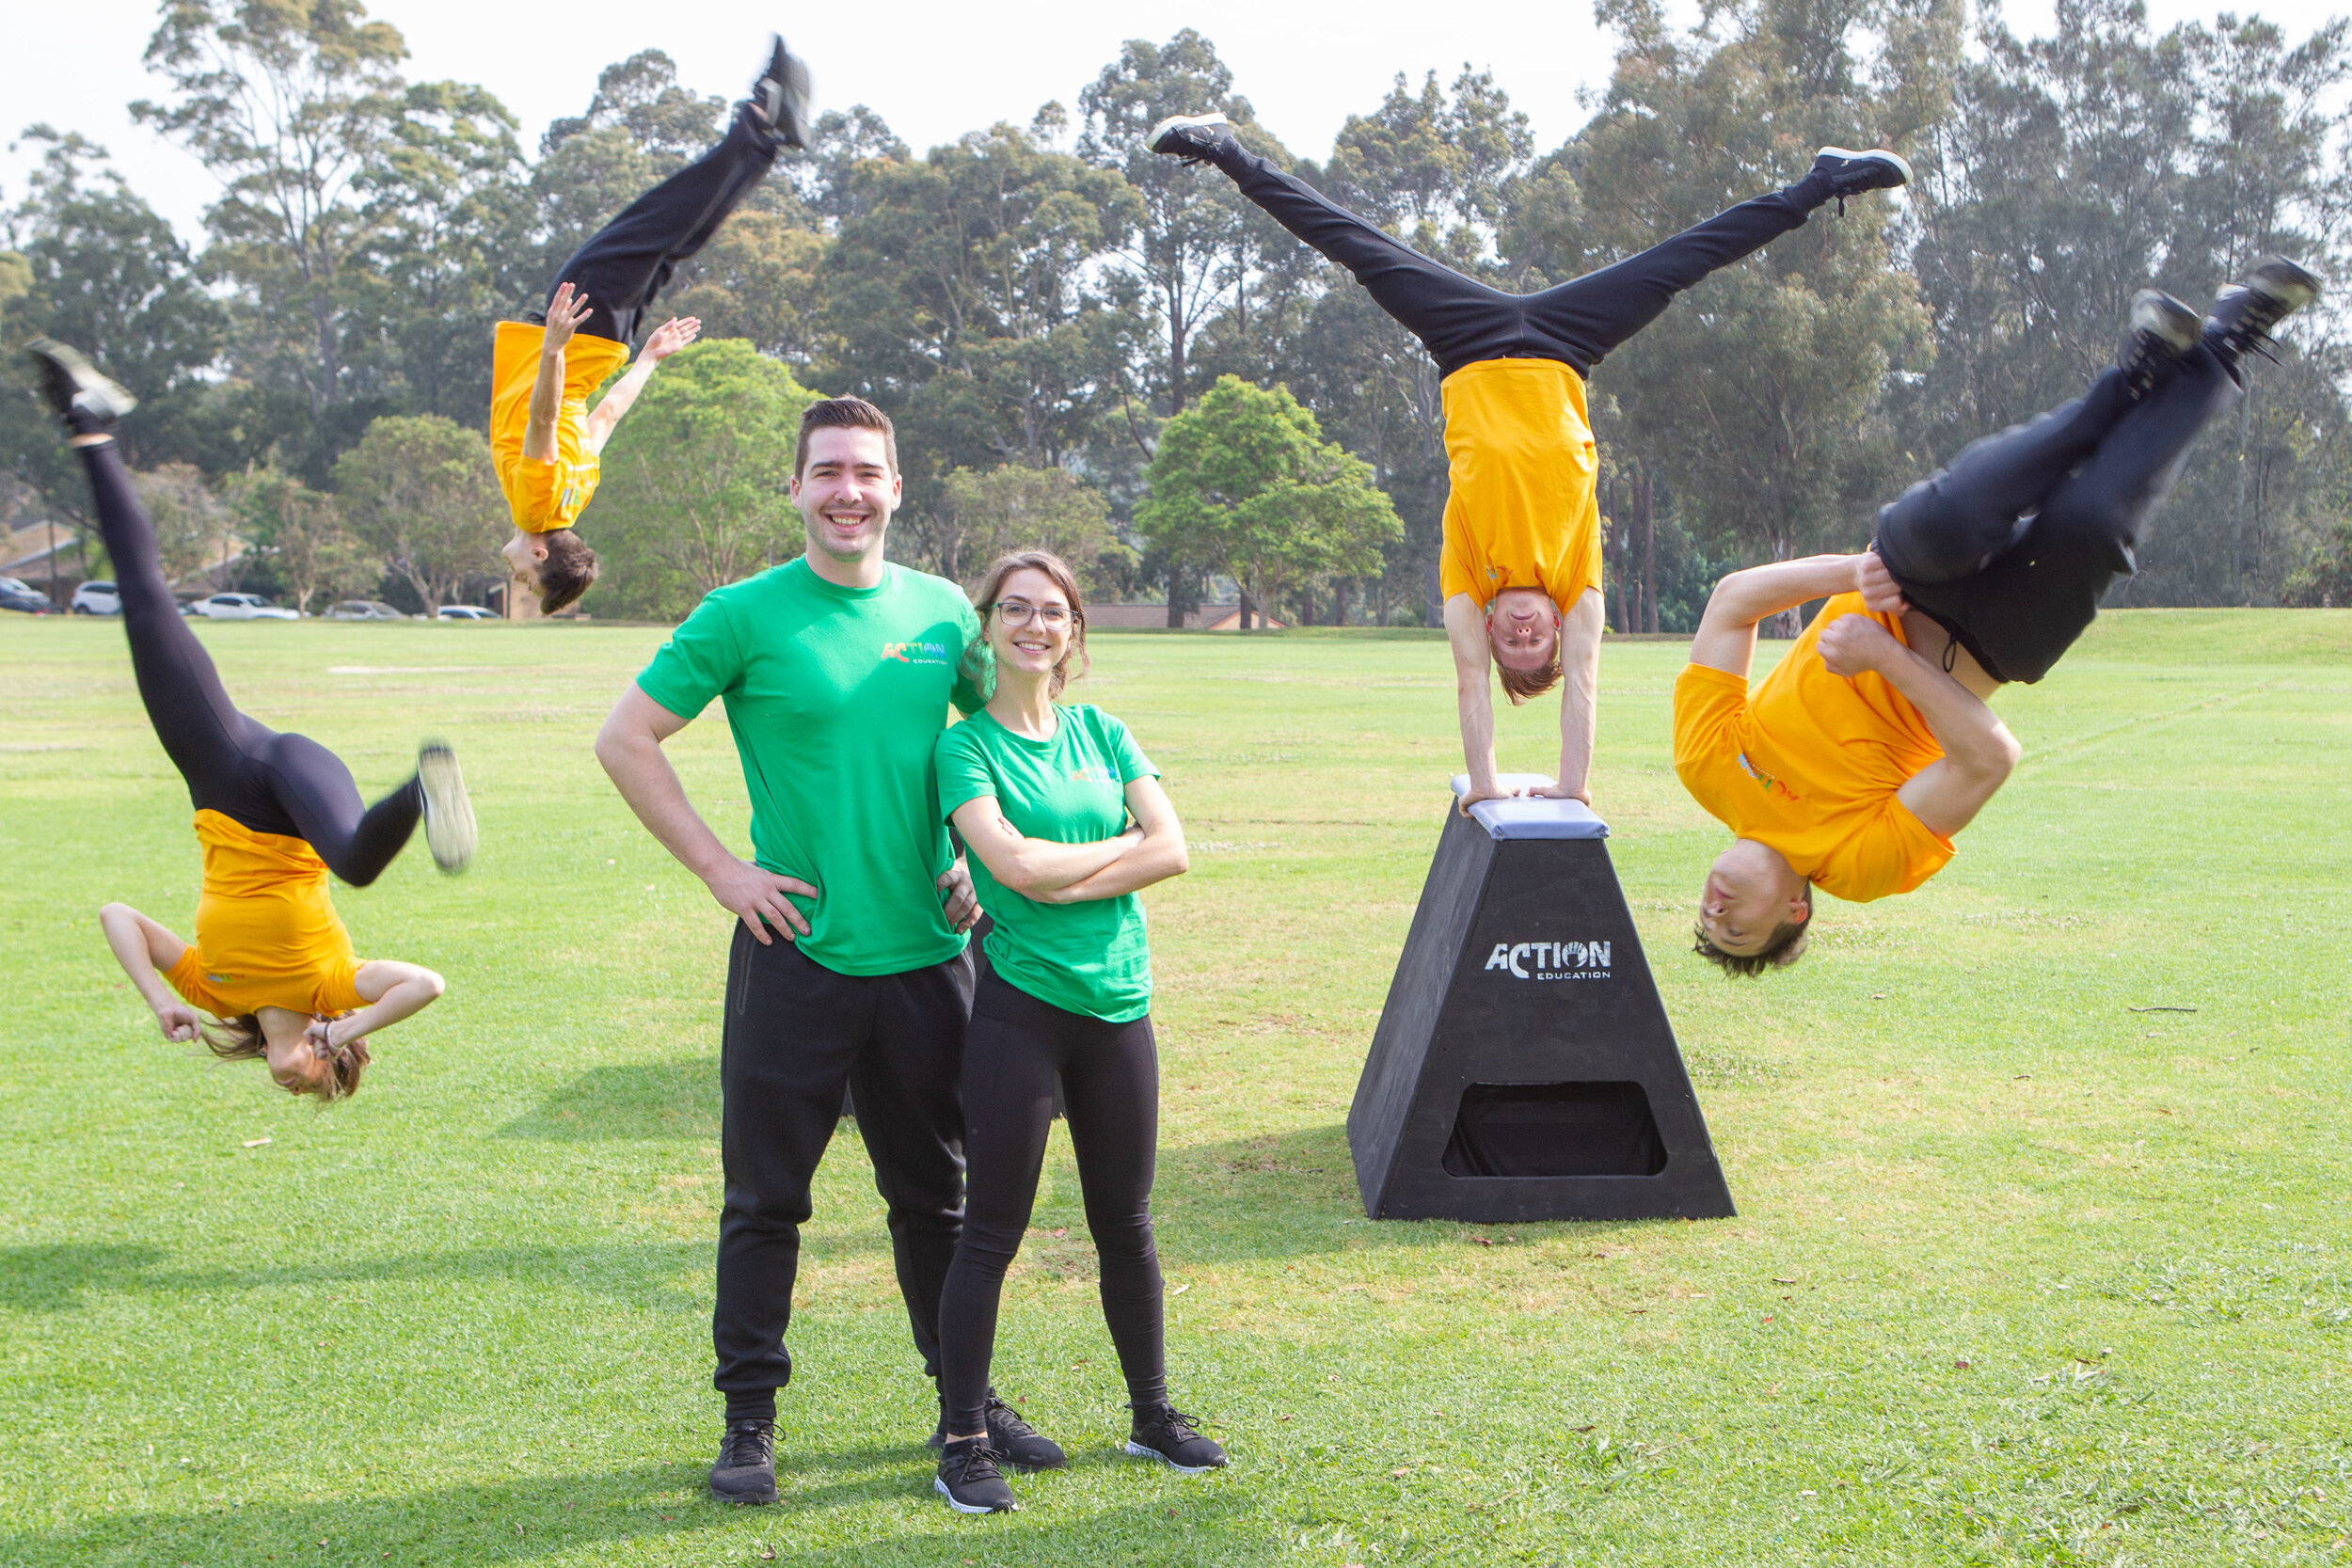   BACKFLIPS AGAINST BULLYING &nbsp;   The founders of Backflips Against Bullying, Sam &amp; Cynthia, perform anti-bullying programs based on acrobatics in schools. DL COMMS used their personal stories to position them as brand as authorities of anti-